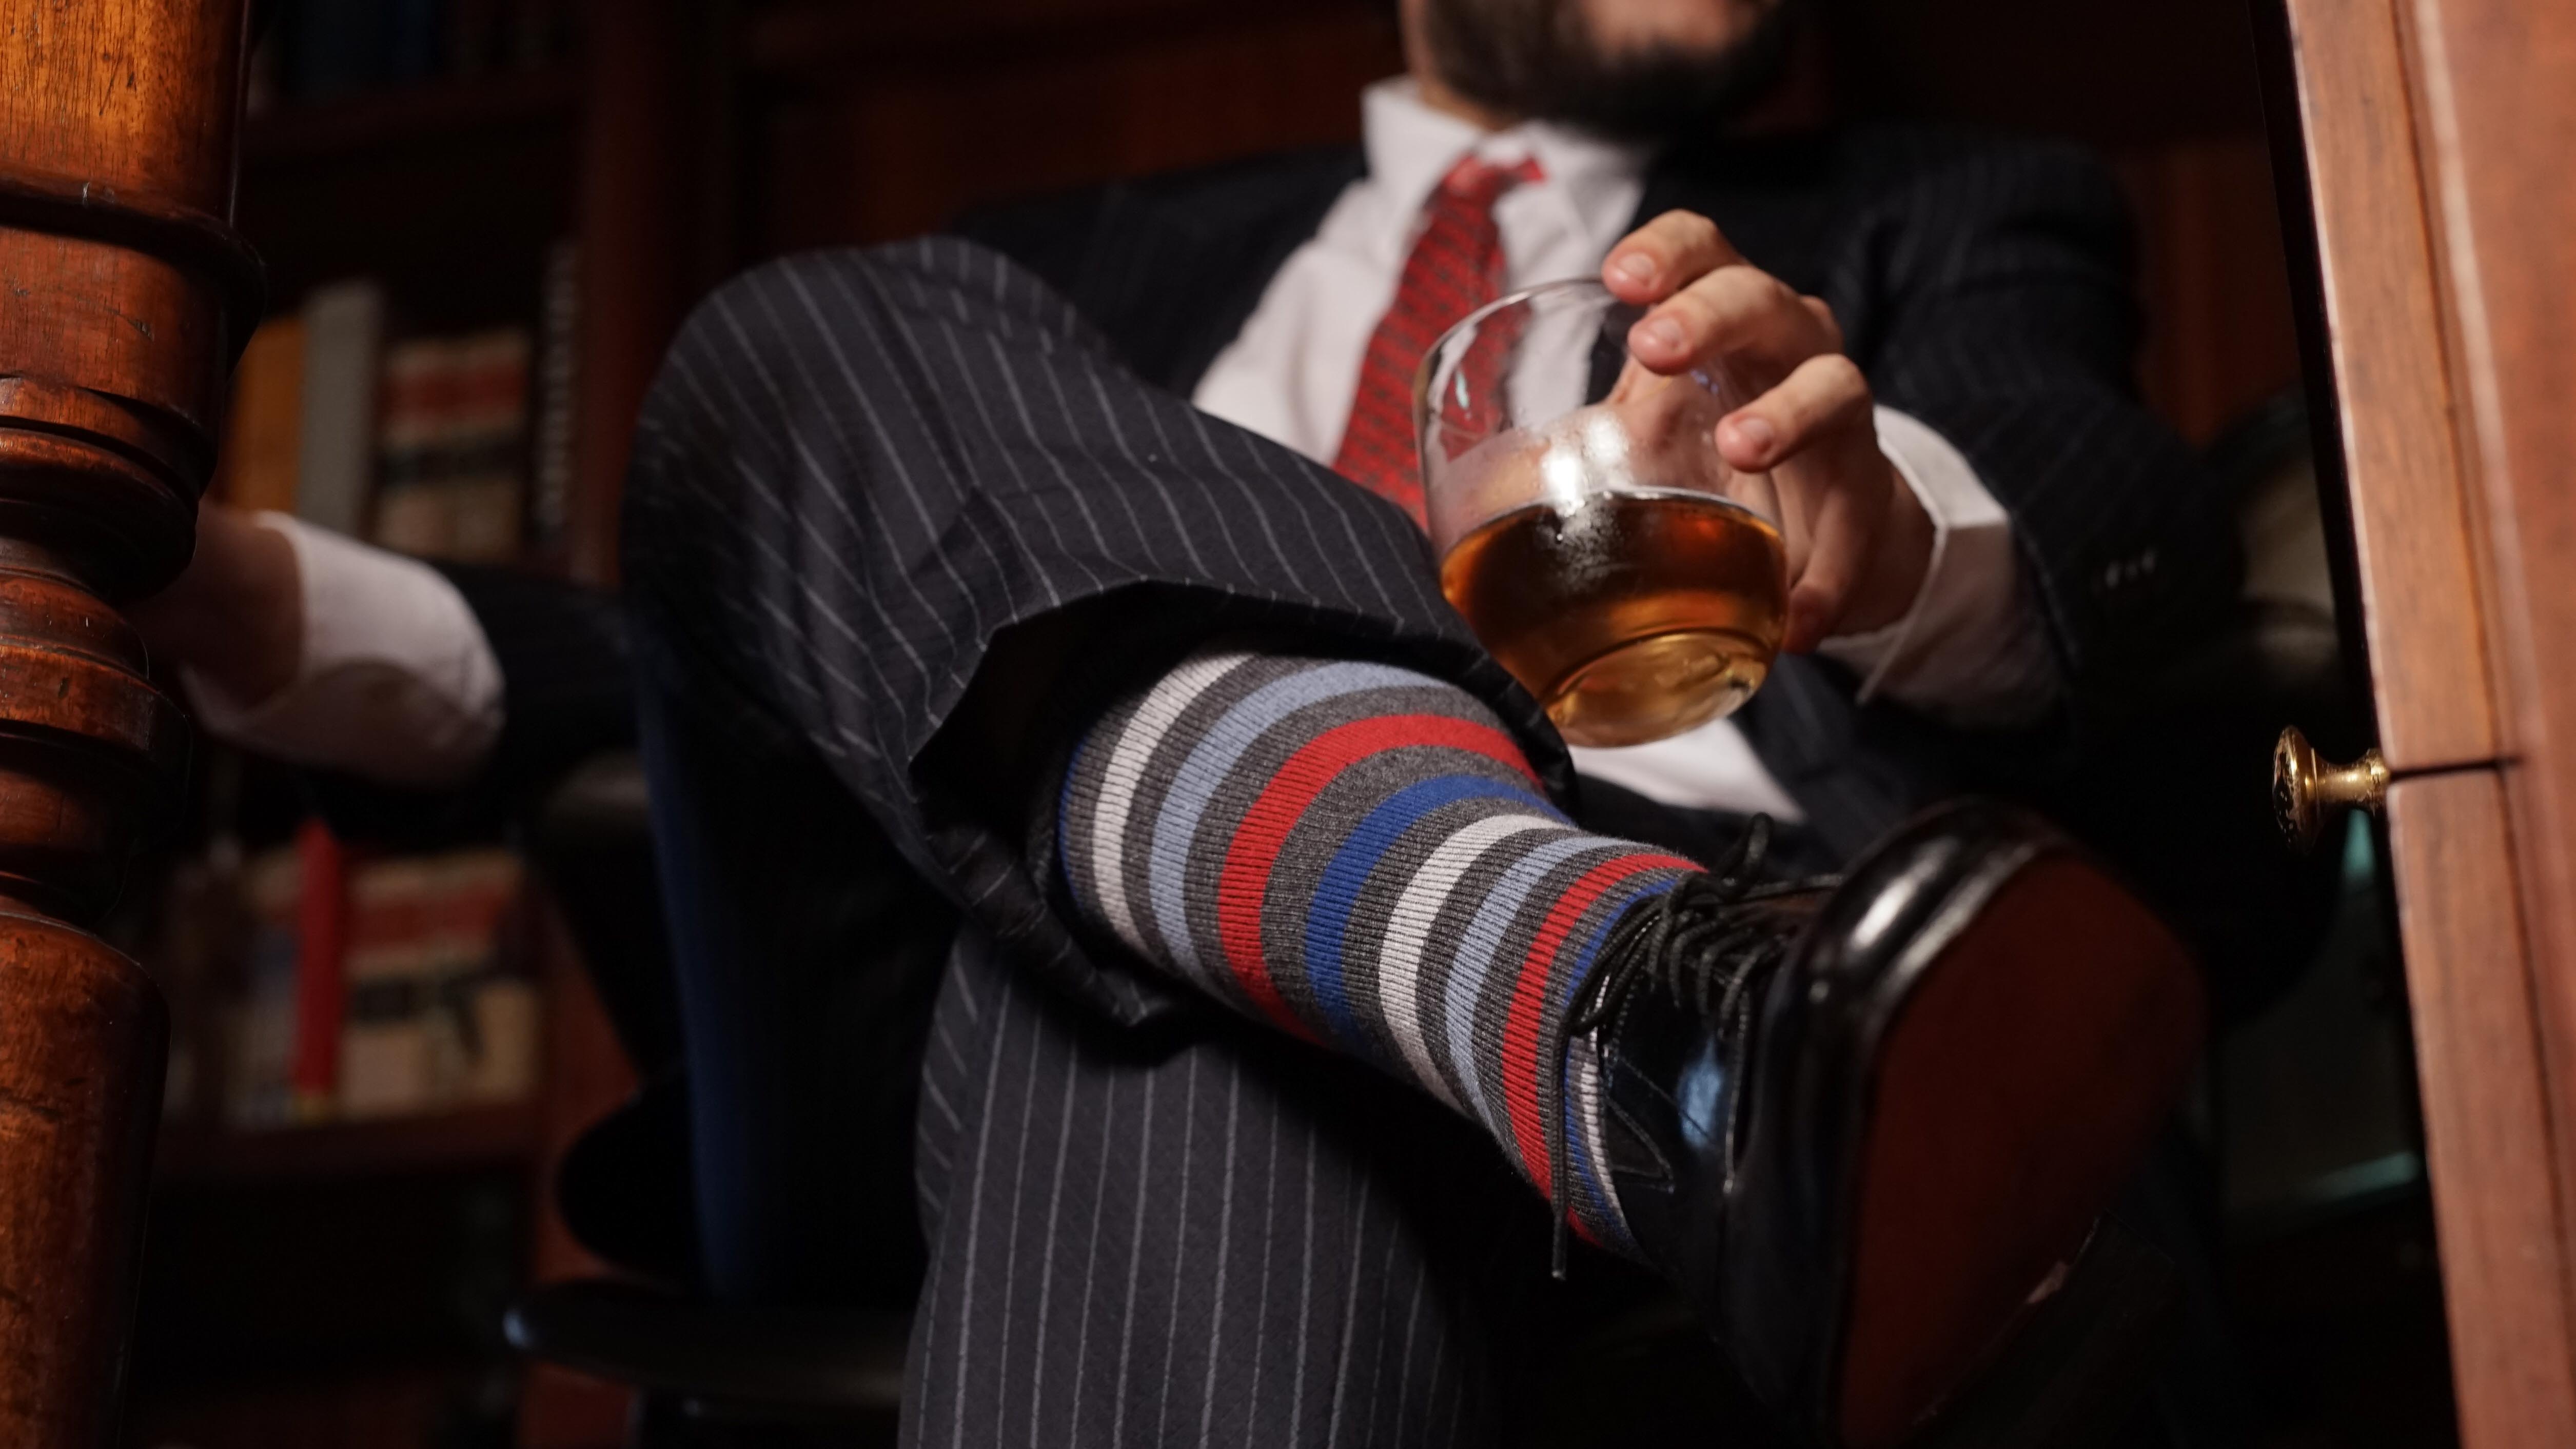 grey over the calf dress socks with red blue and beige striped pattern, black dress shoes, black dress pants